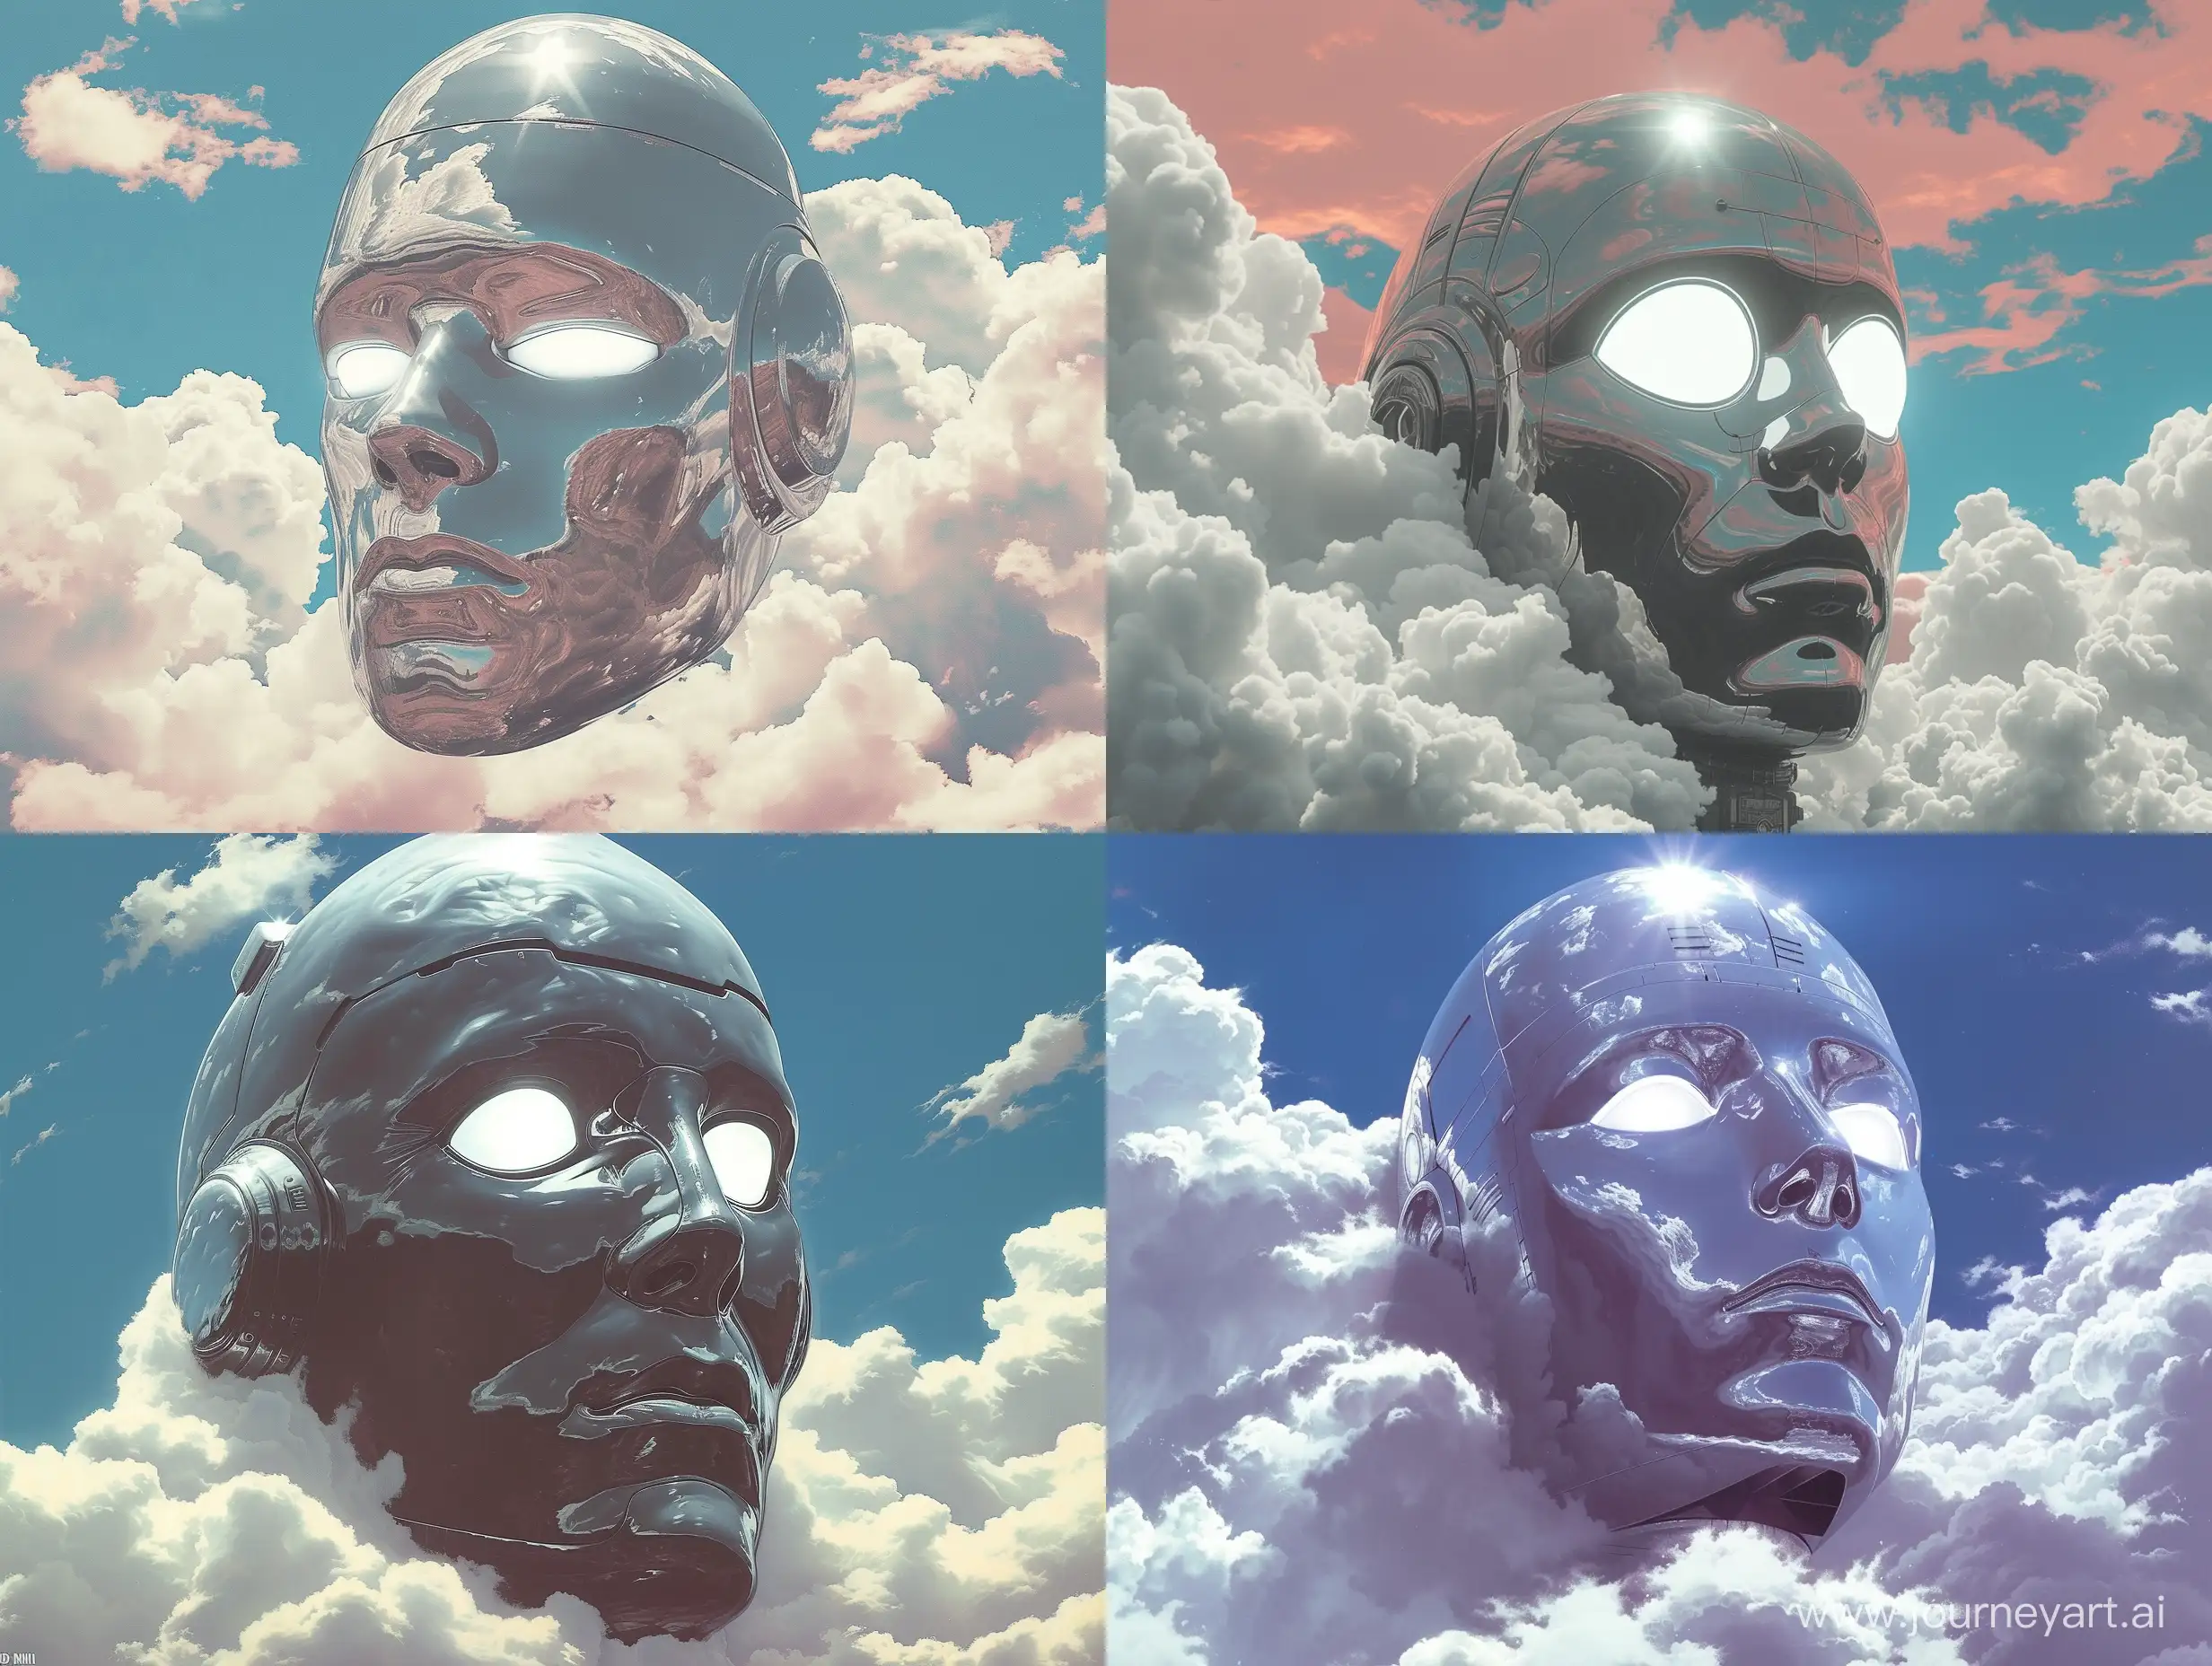 Retro-Synthwave-Art-Giant-Silver-Head-in-Clouds-with-Glowing-Eyes